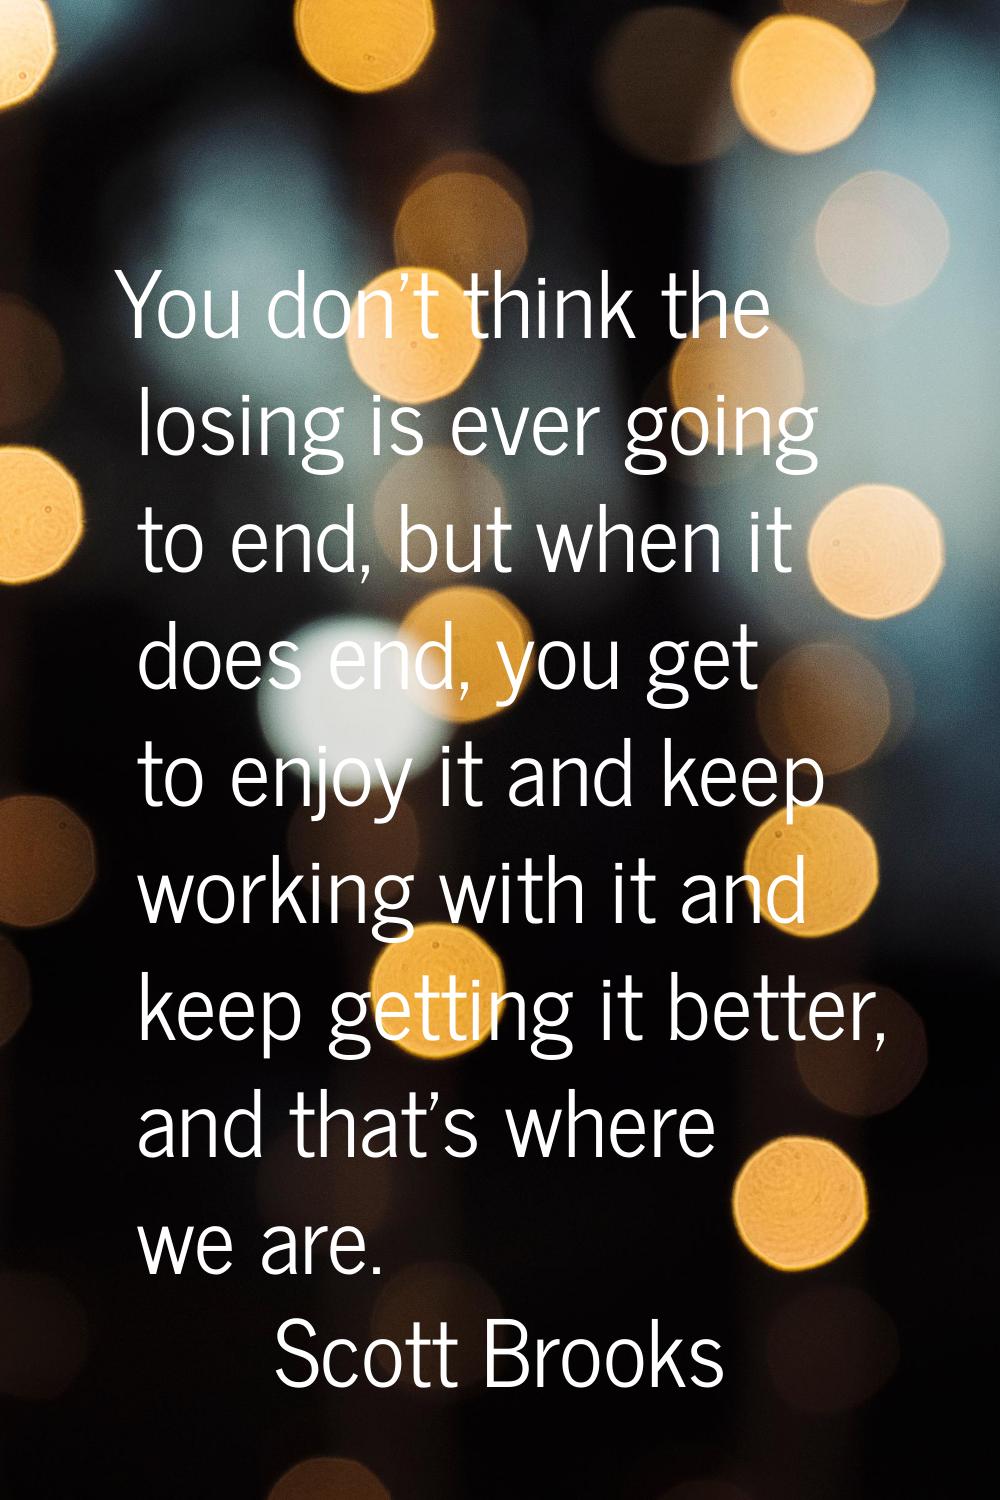 You don't think the losing is ever going to end, but when it does end, you get to enjoy it and keep